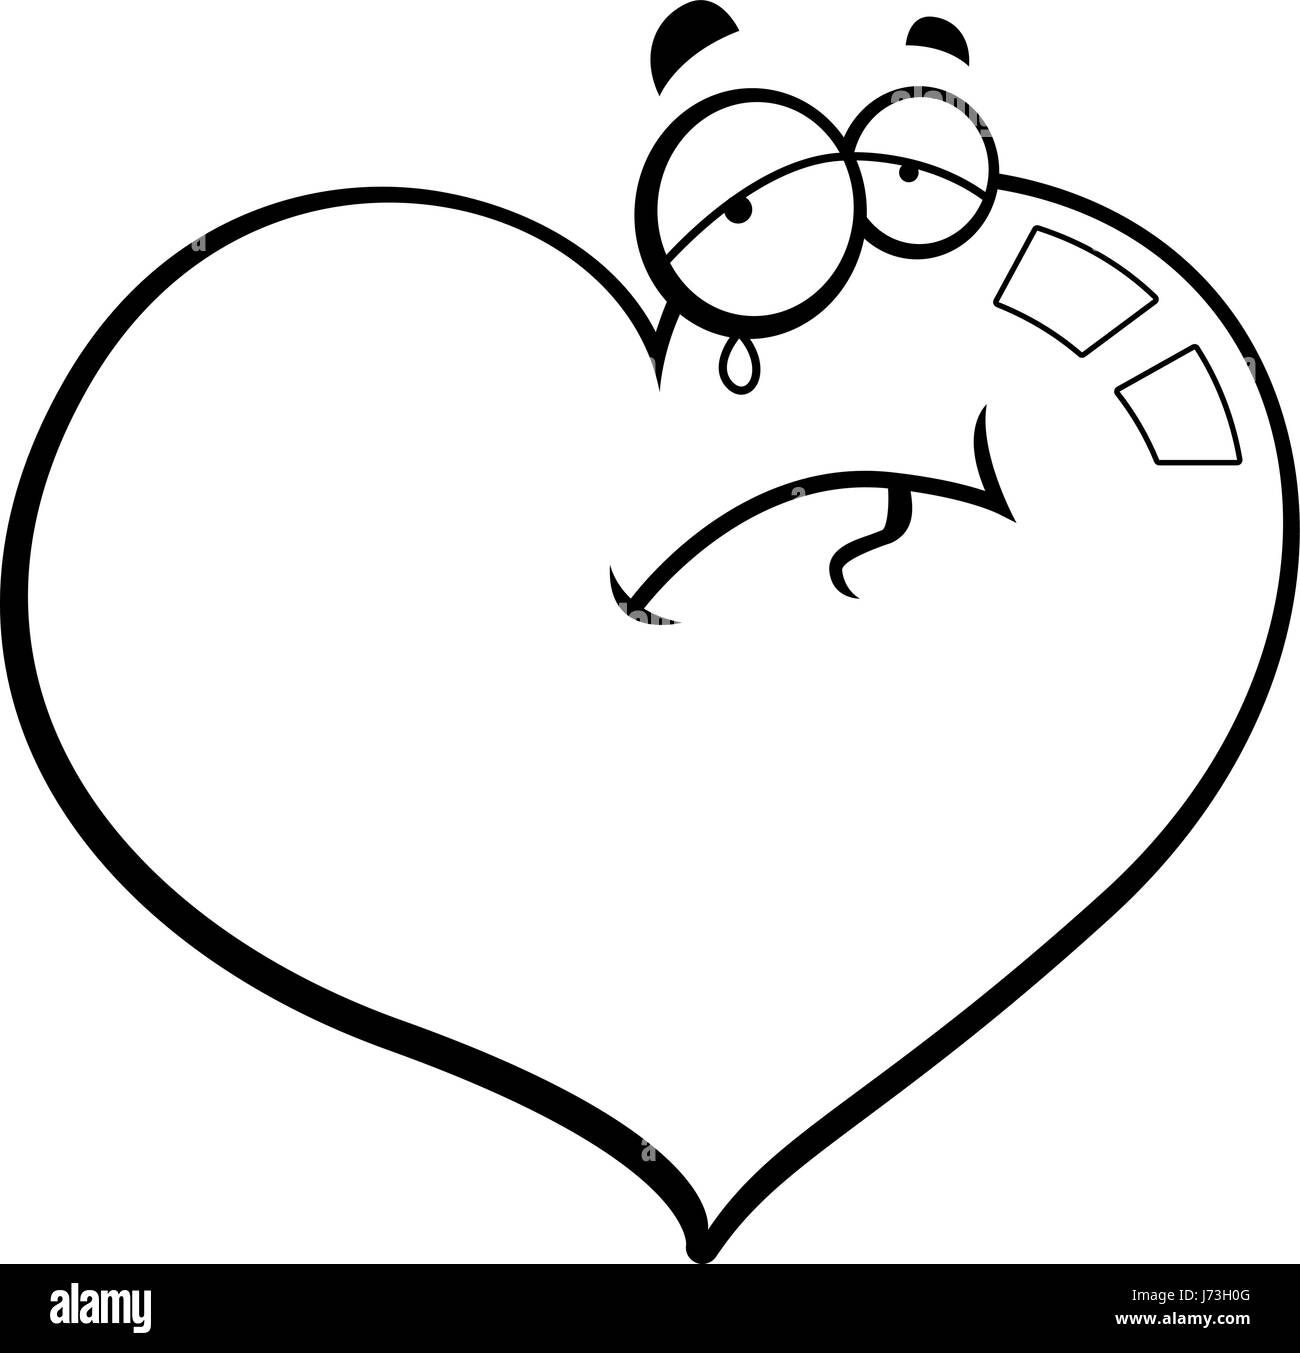 Crying heart Stock Vector Images - Alamy